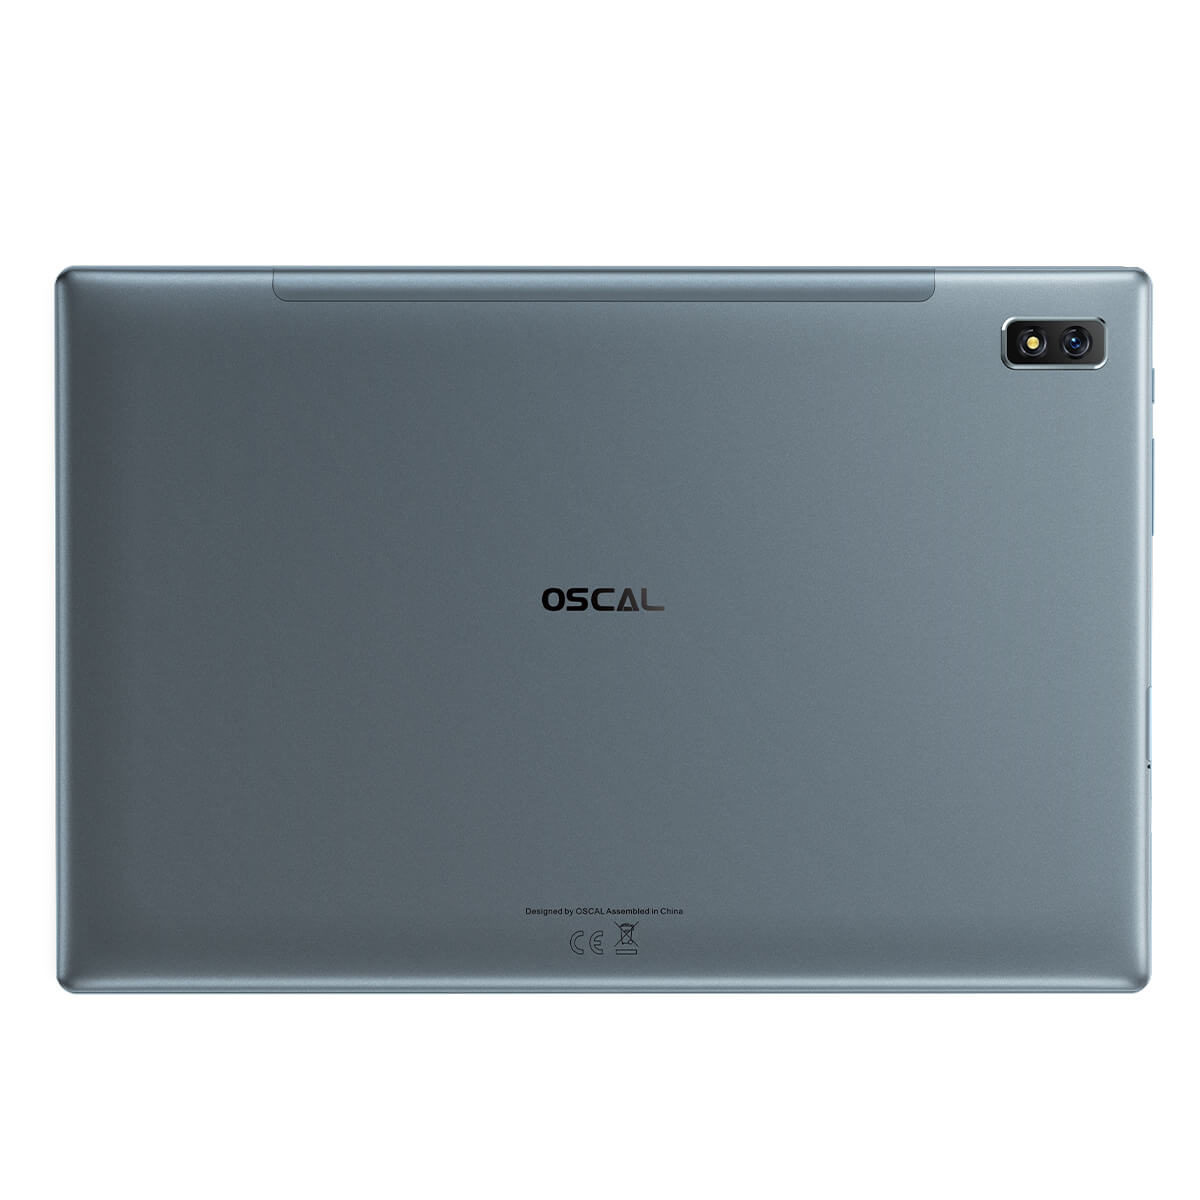 Oscal Pad 8 10.1" 4GB+64GB 4G Tablet Specs, Price – Blackview Official